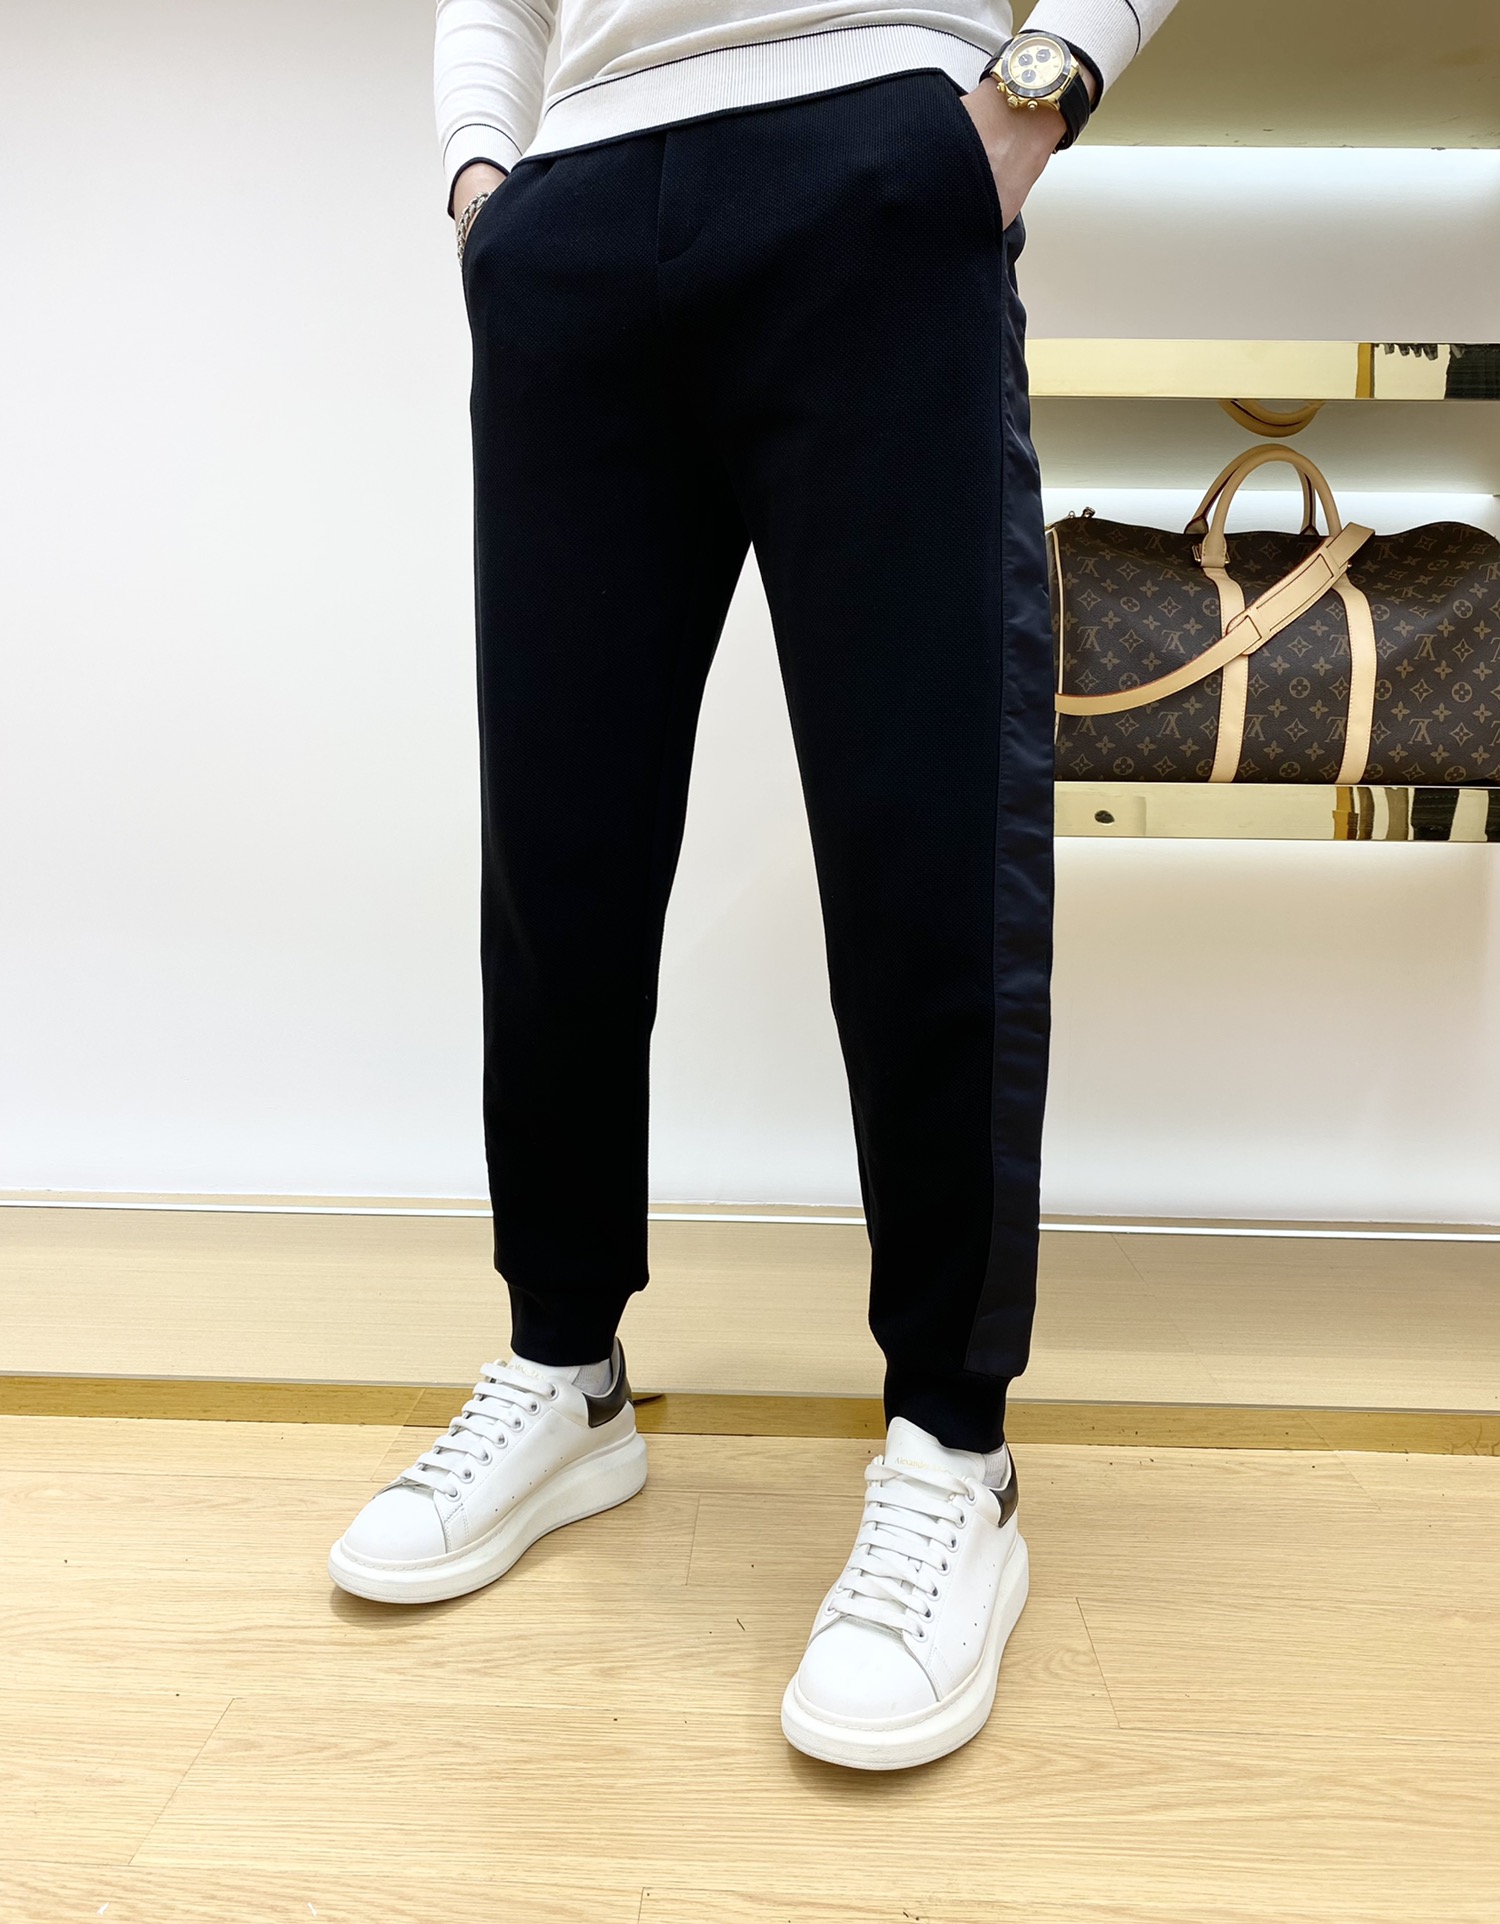 Prada Clothing Pants & Trousers Fall Collection Fashion Casual